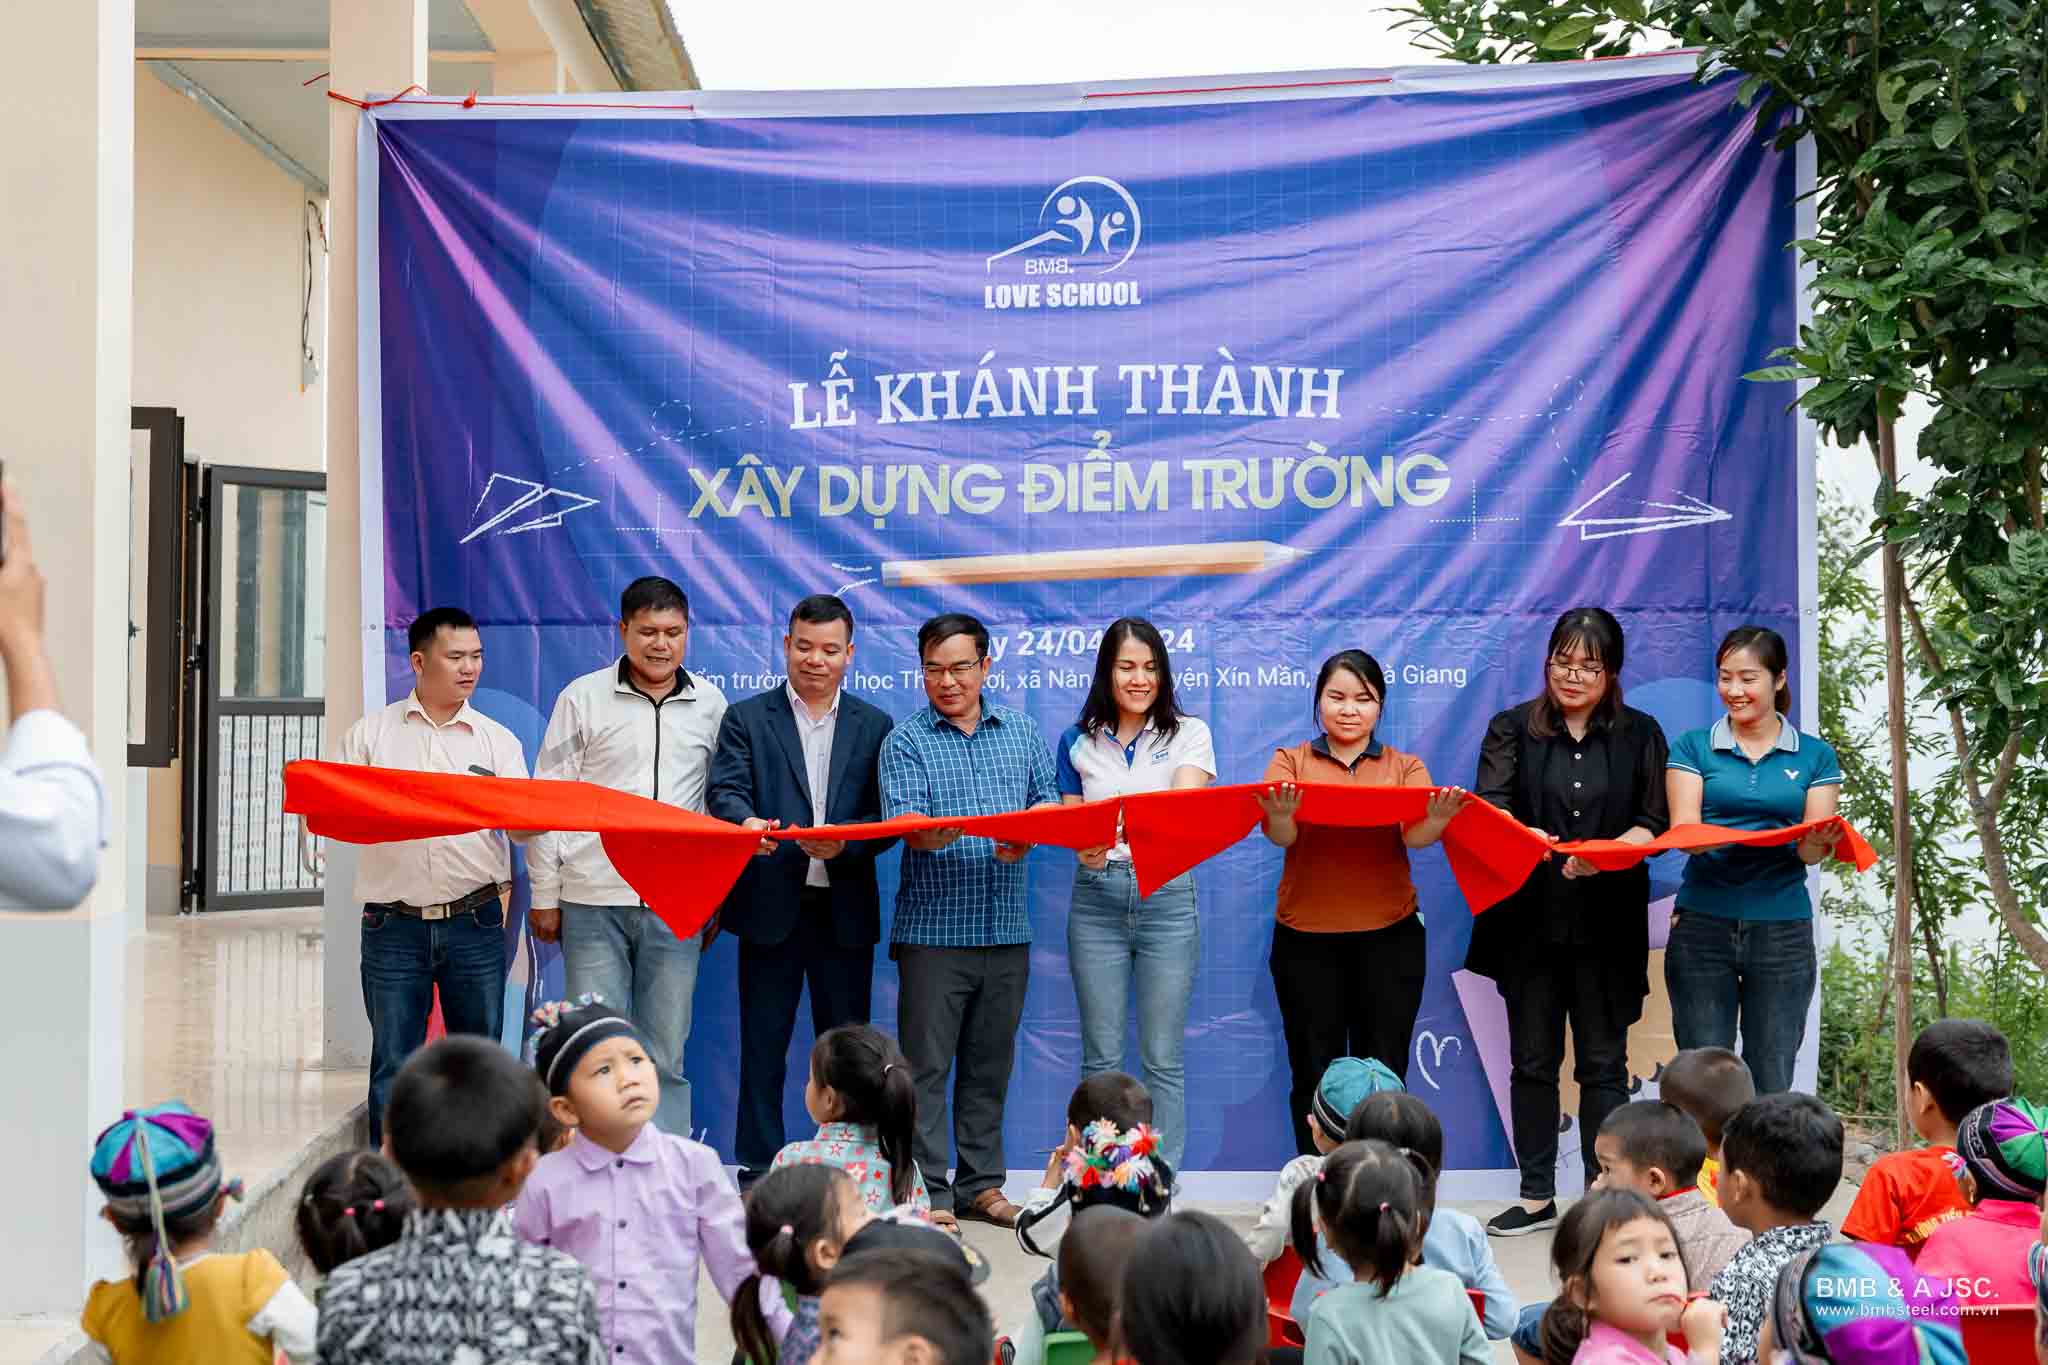 Opening ceremony of the construction of Thang Loi primary school in Ha Giang